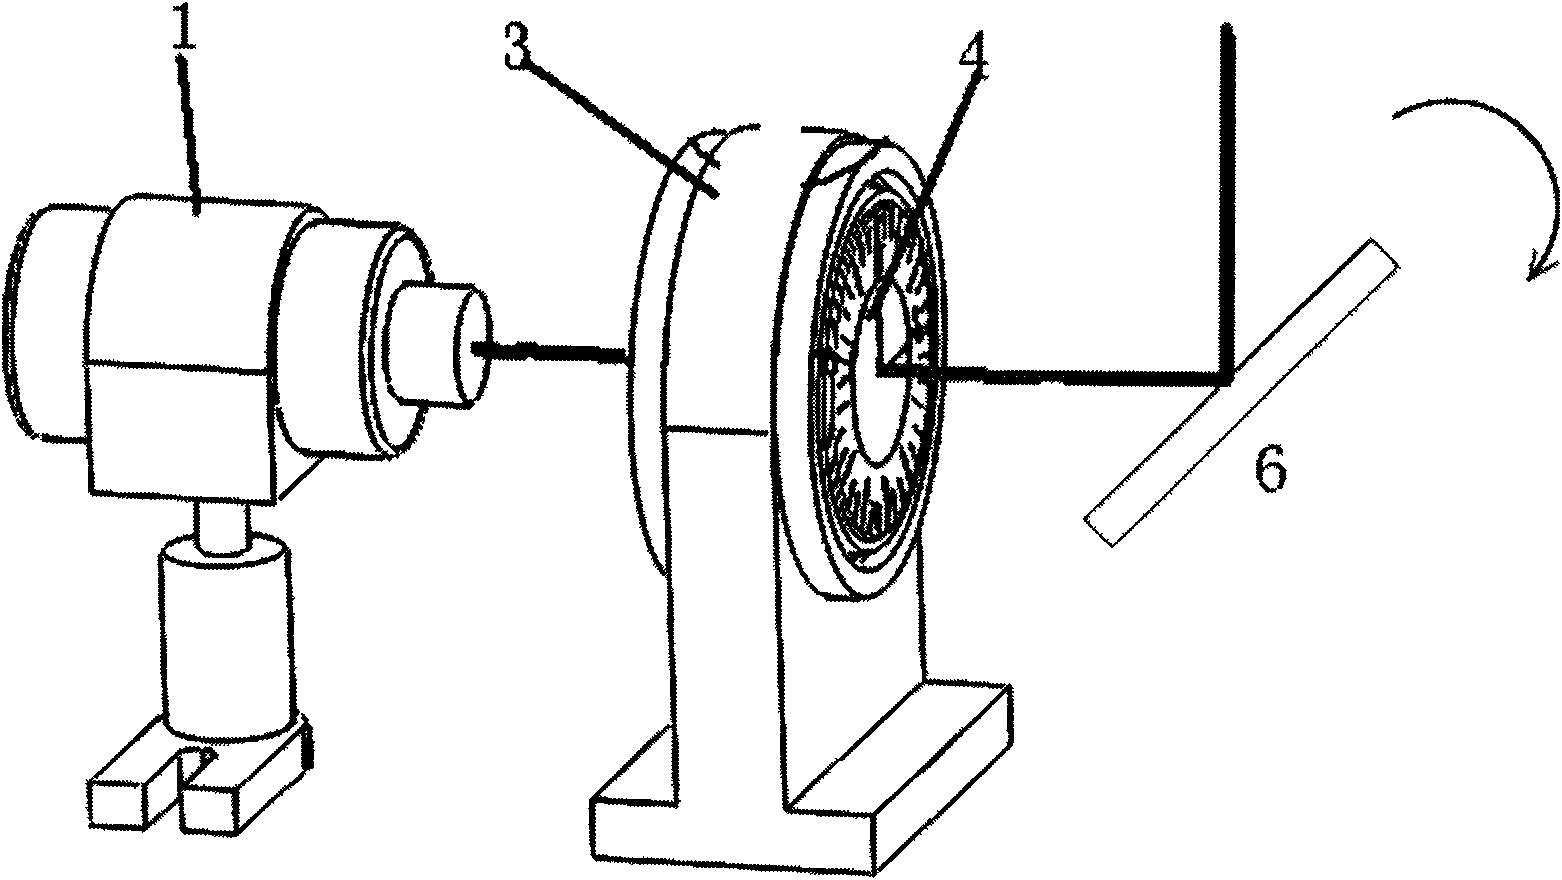 A device and method for calibrating the transmission axis of a polarizer